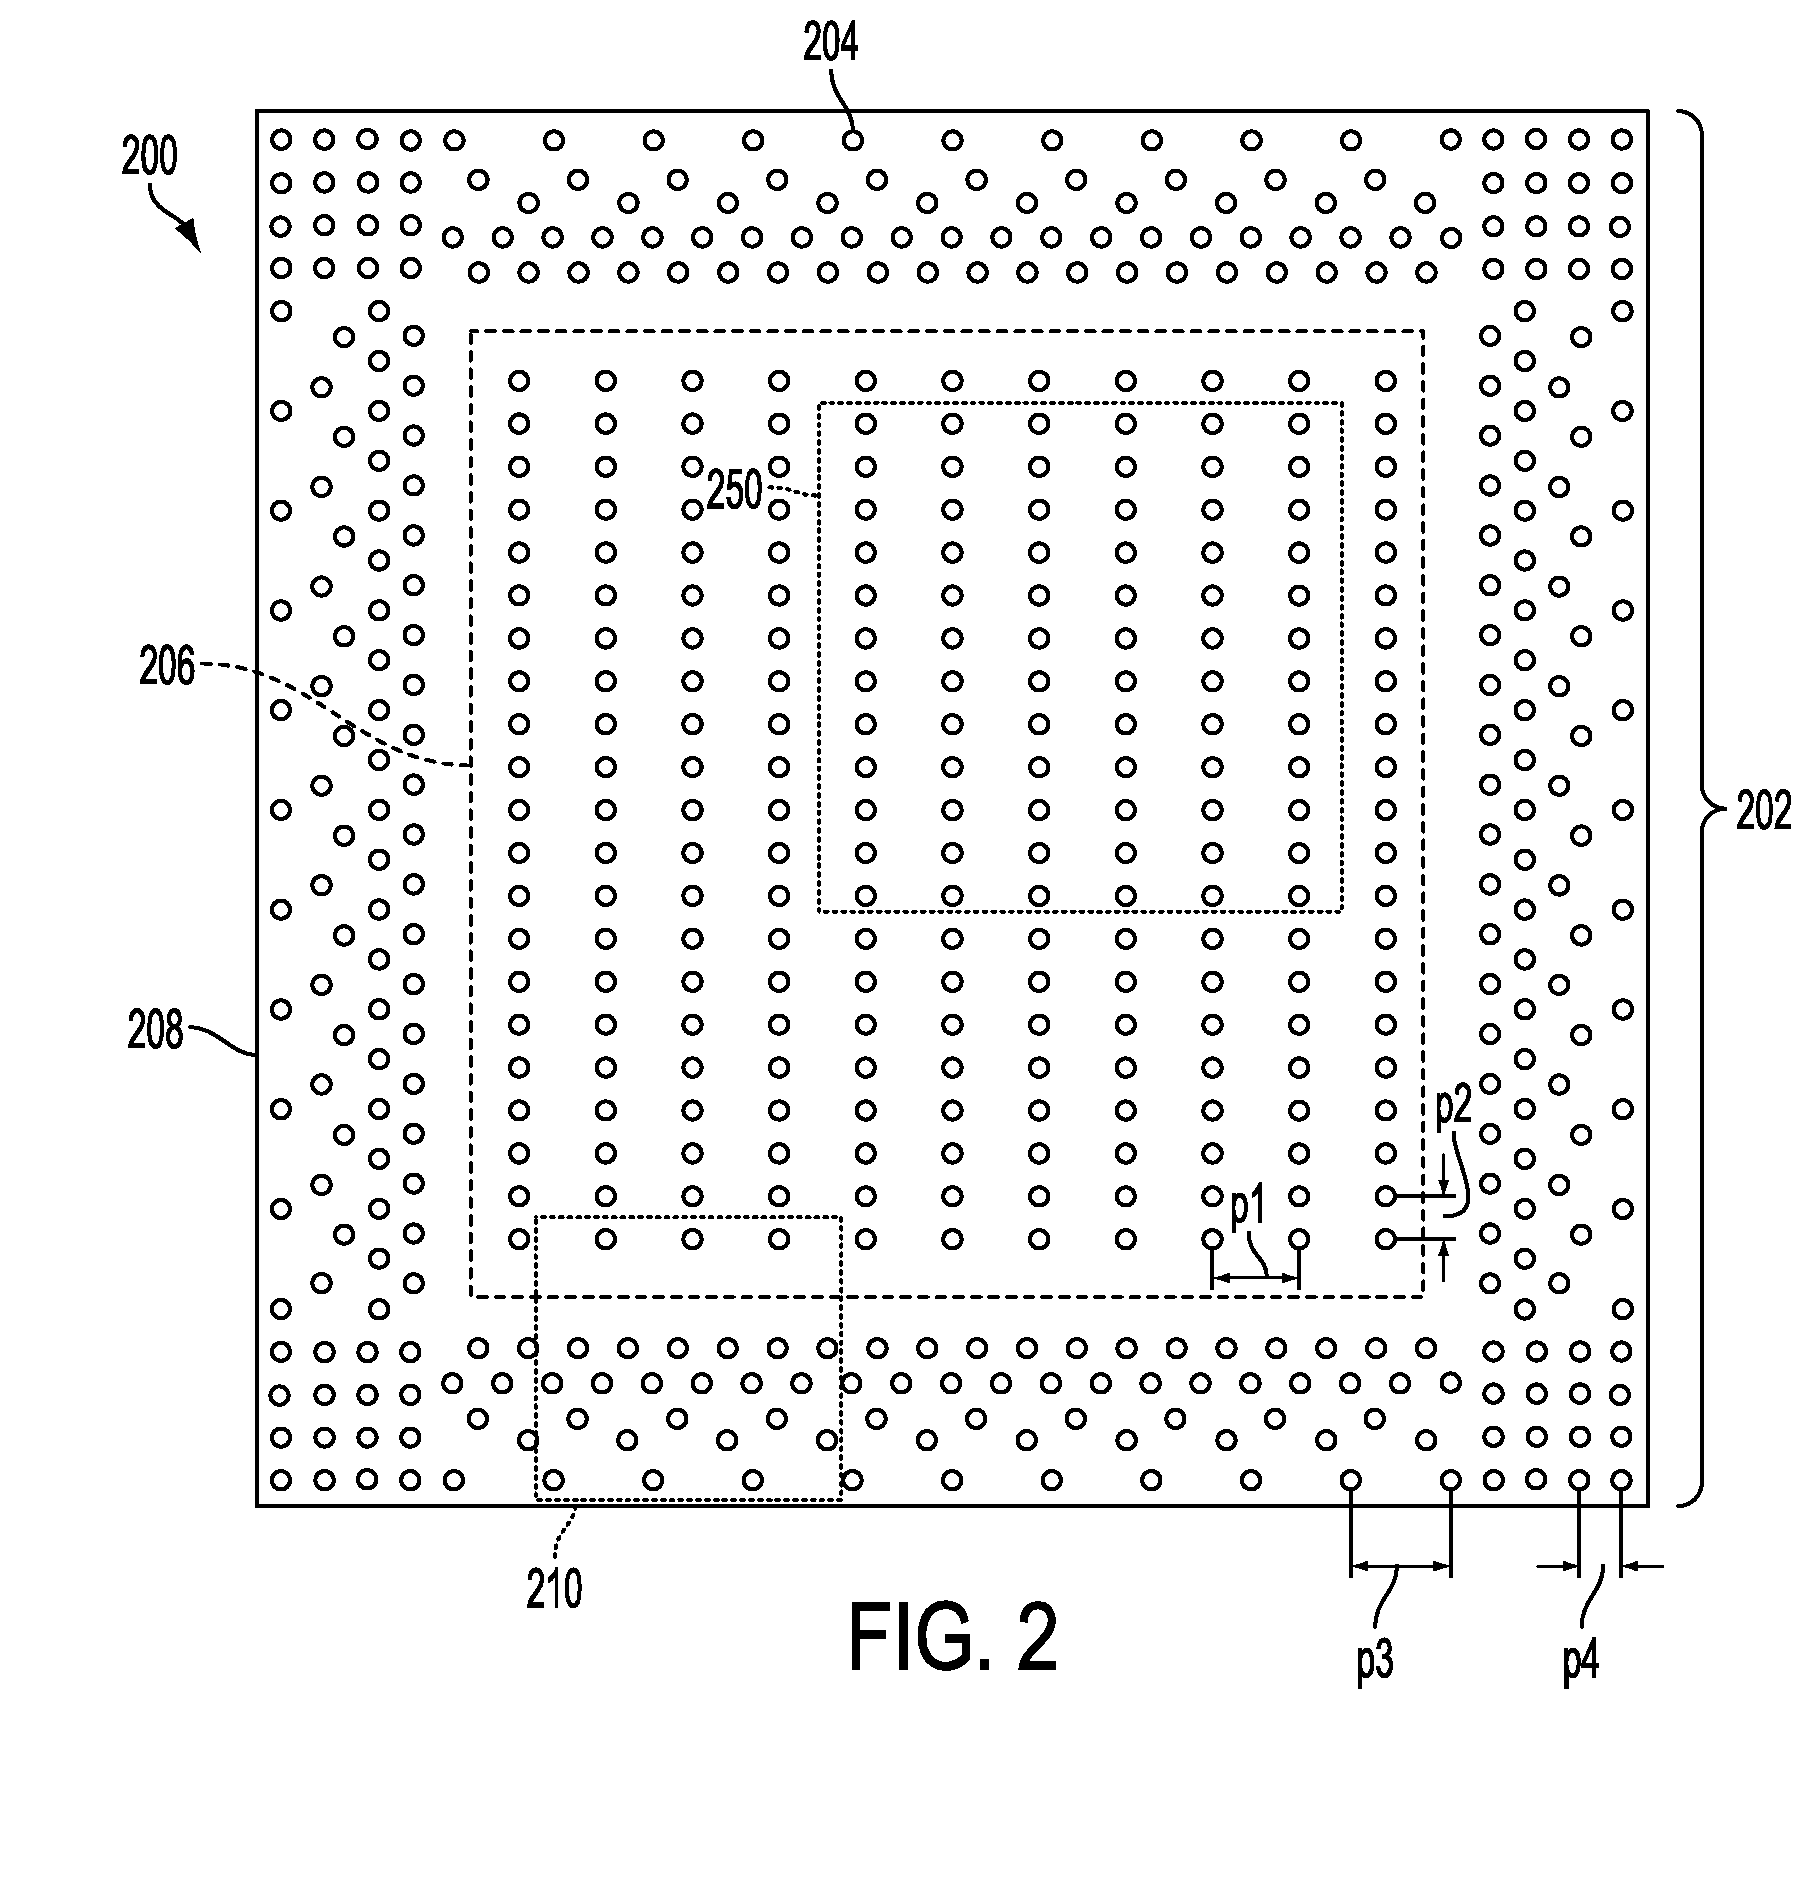 Interconnect layouts for electronic assemblies